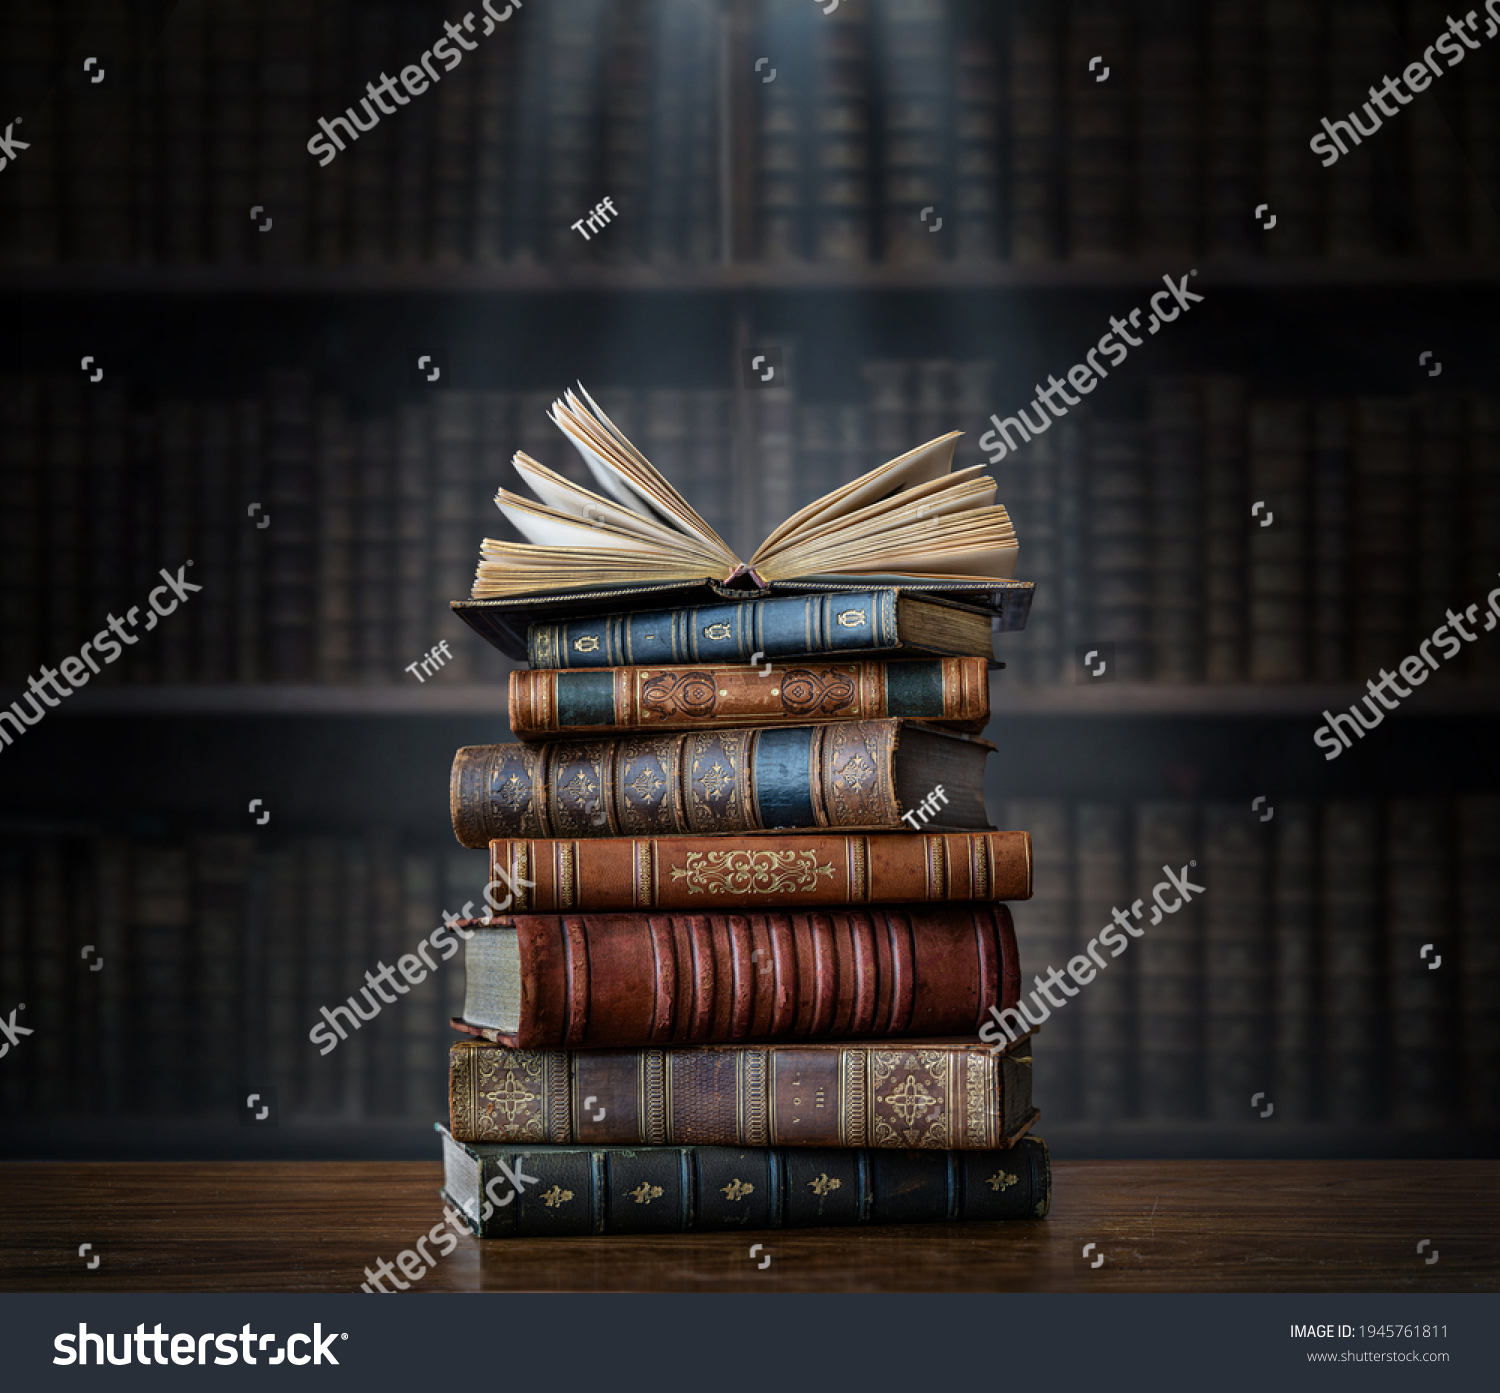 A stack of old books on table against background of bookshelf in library. Ancient books as a symbol of knowledge, history, memory and information. Conceptual background on education, literature topics #1945761811